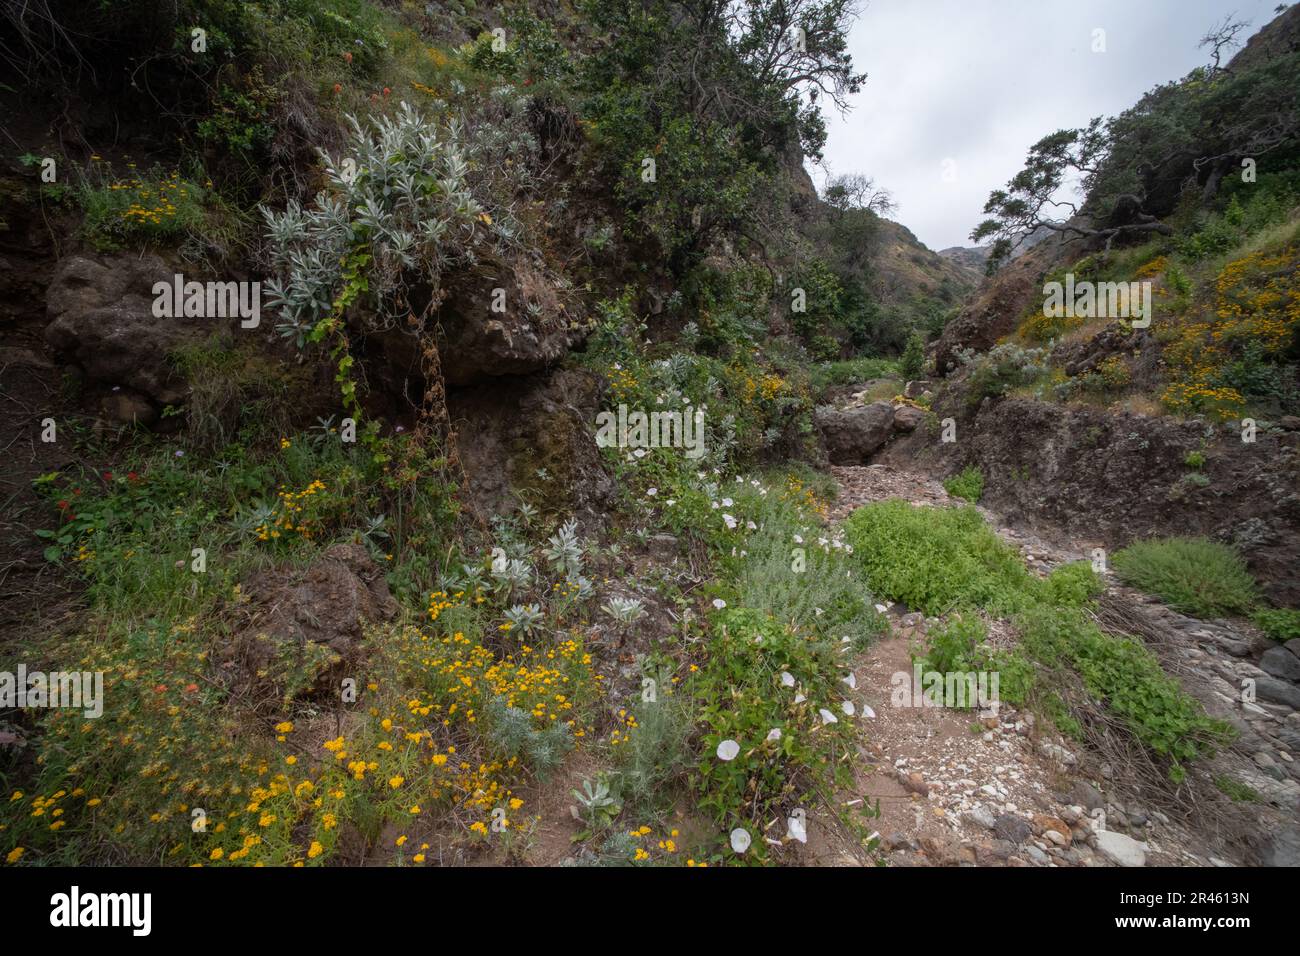 Wild flowers blooming on Santa Cruz island in the Channel islands National Park, Southern California, USA. Stock Photo